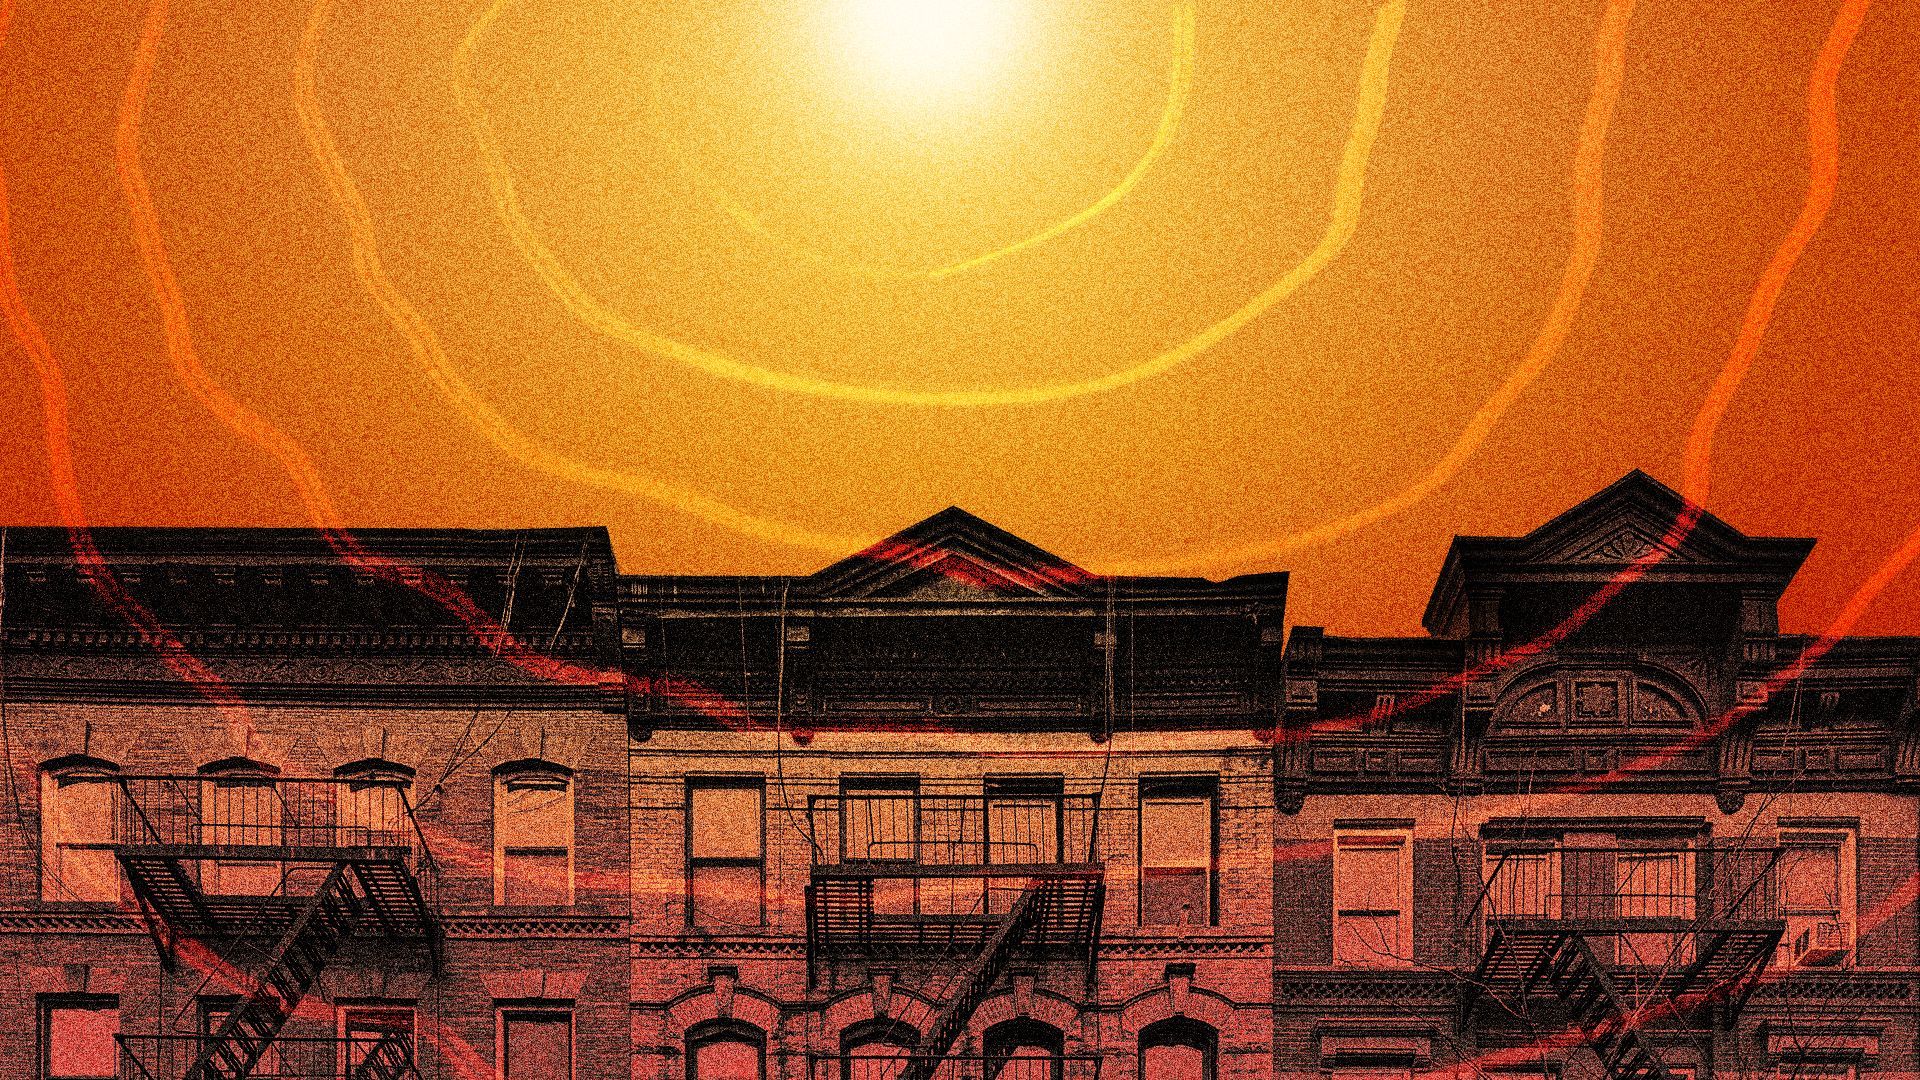 Illustration of the sun's rays beating down on apartment buildings.